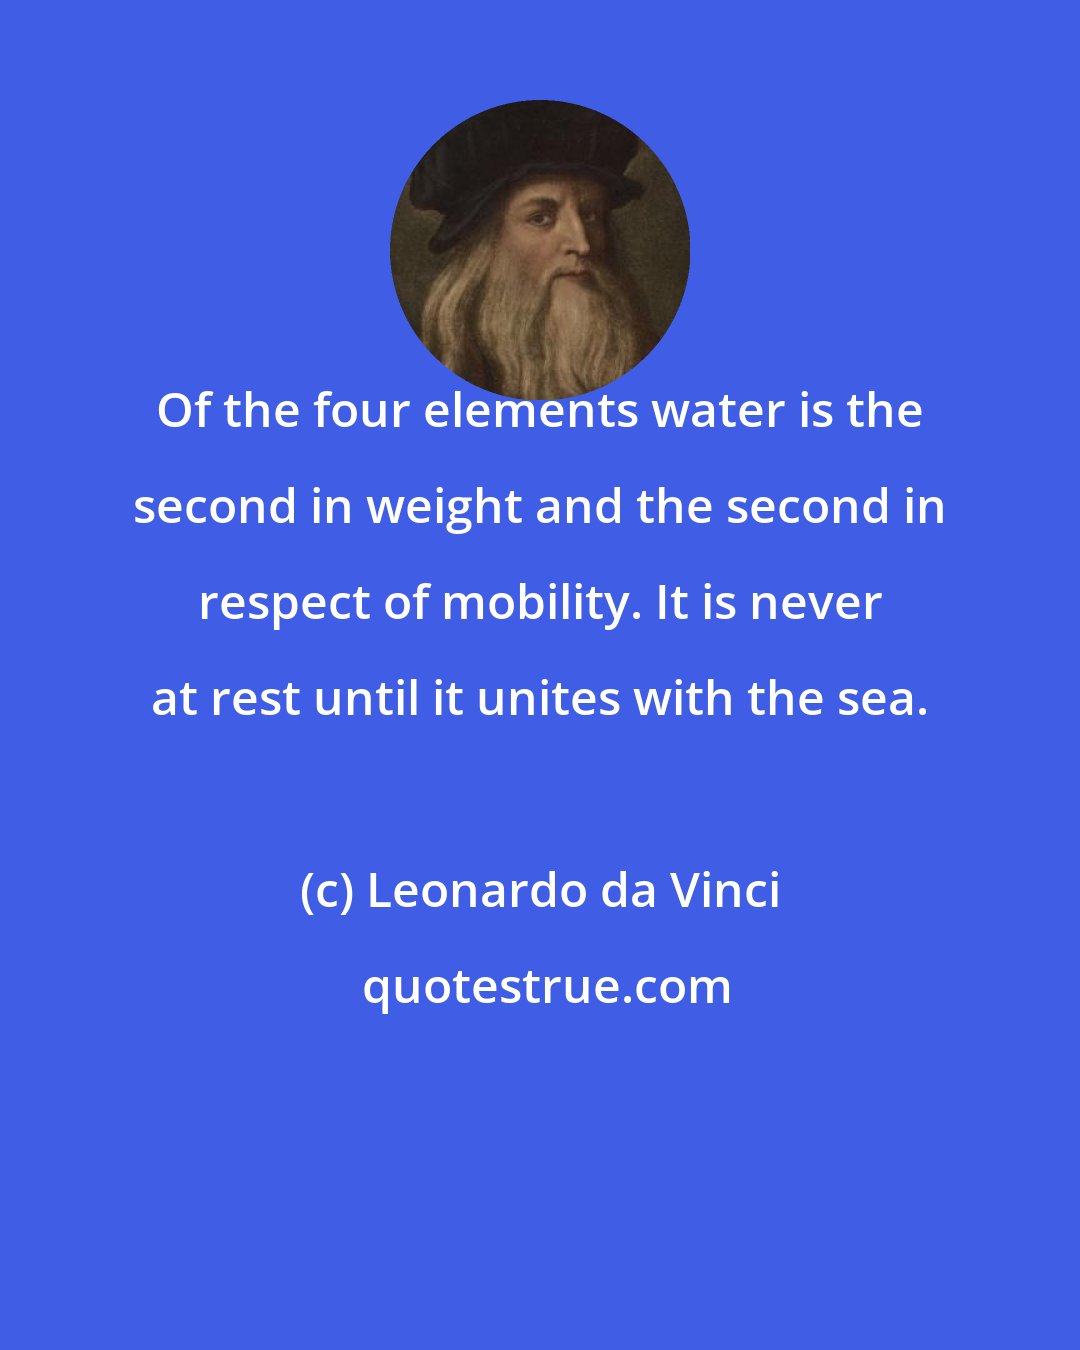 Leonardo da Vinci: Of the four elements water is the second in weight and the second in respect of mobility. It is never at rest until it unites with the sea.